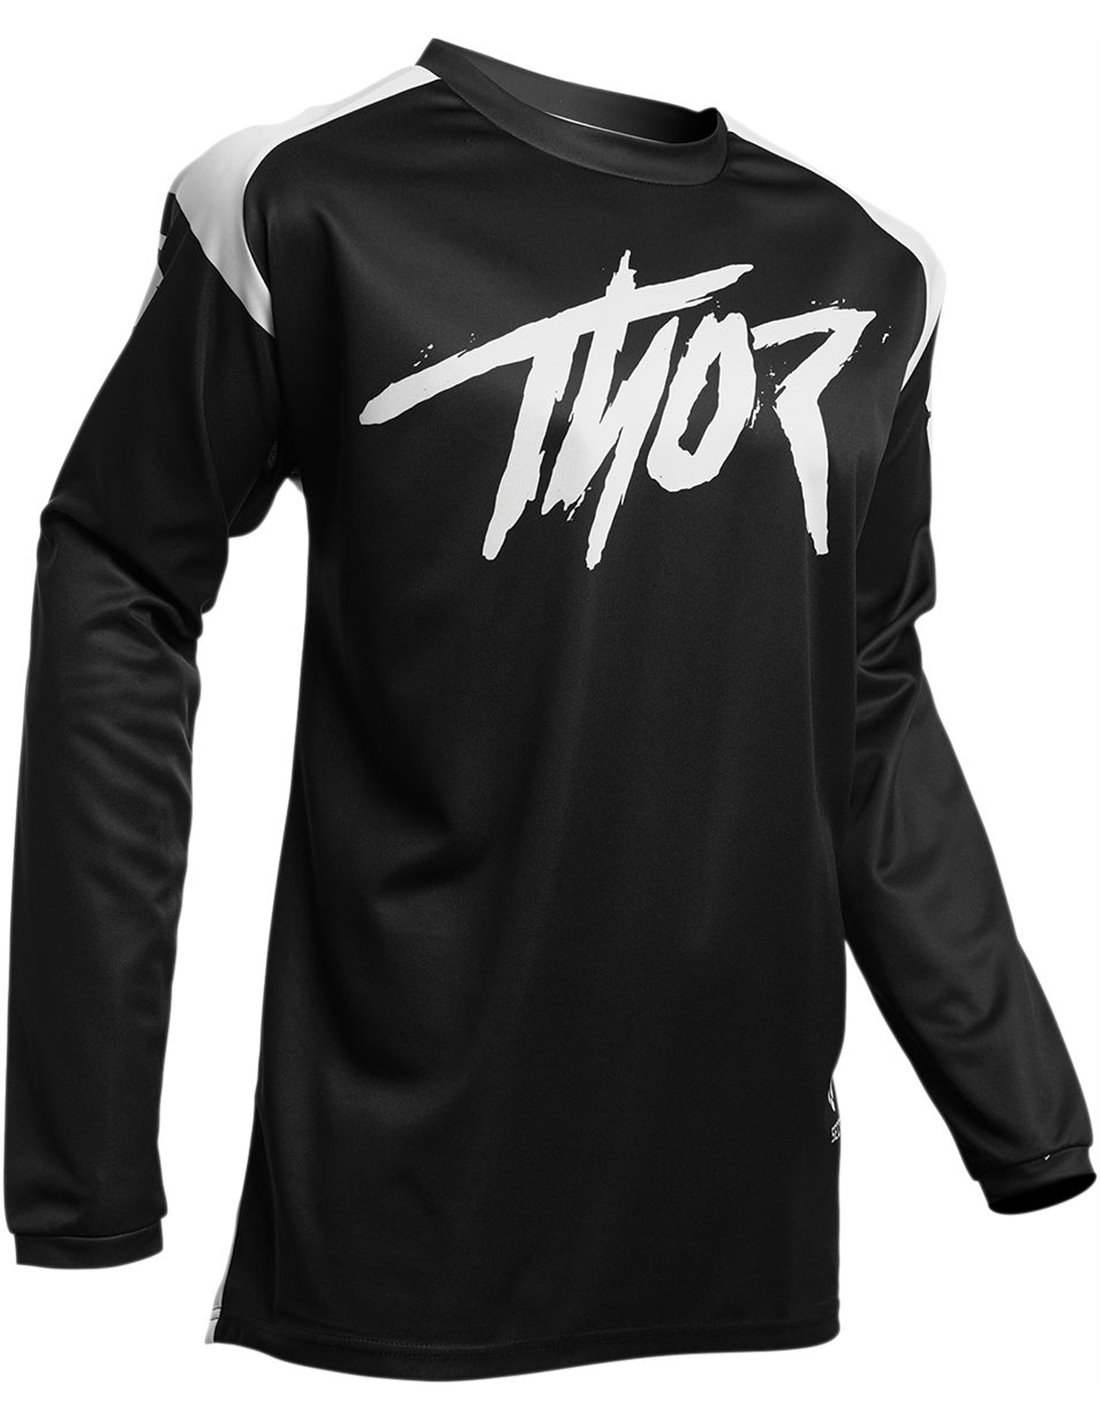 CAMISA THOR SECTOR L 0